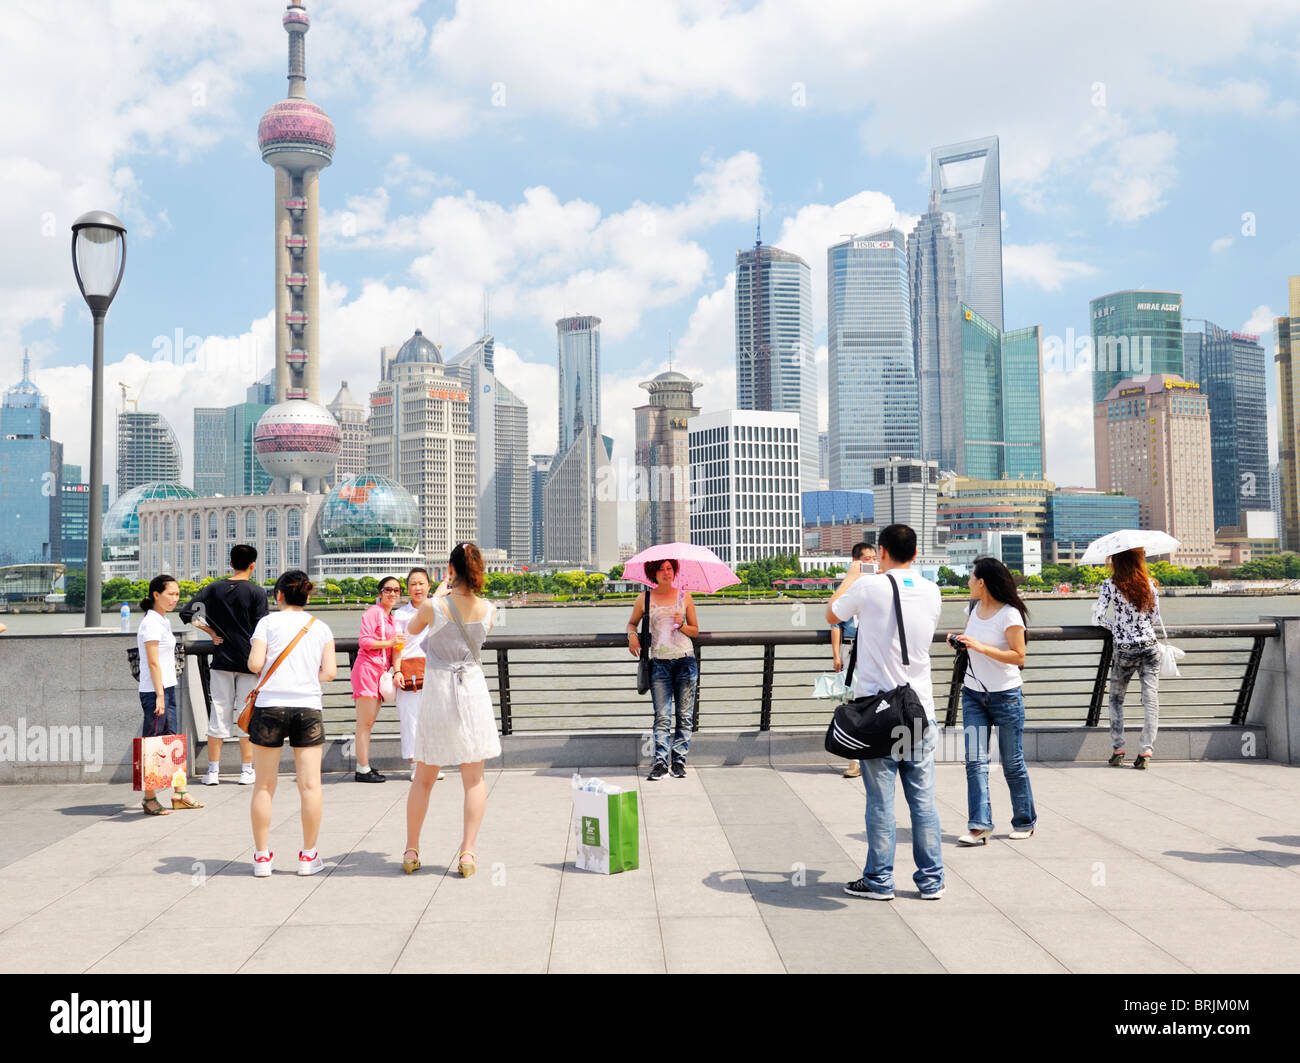 The Bund, Shanghai, China. Chinese tourists photograph each other on The Bund against backdrop of Pudong district tower skyline Stock Photo